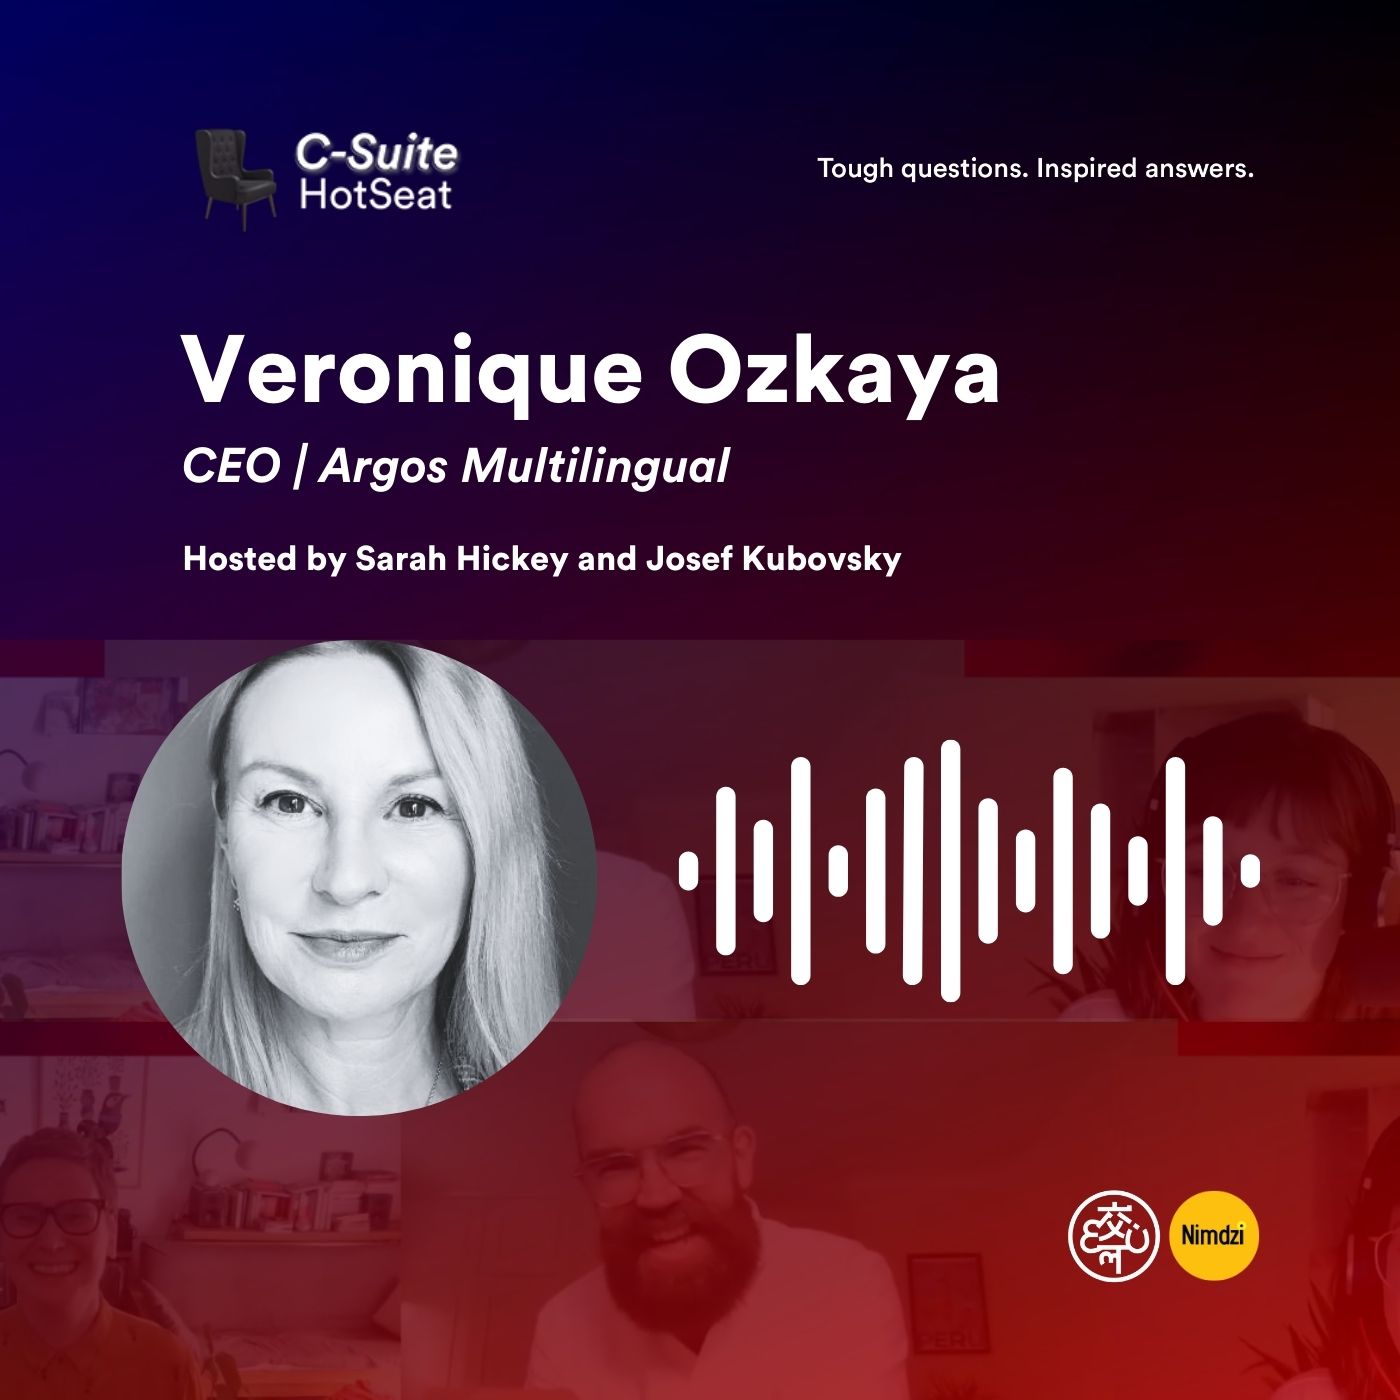 Be Bold and Persistent with CEO Veronique Ozkaya | C-Suite HotSeat E09